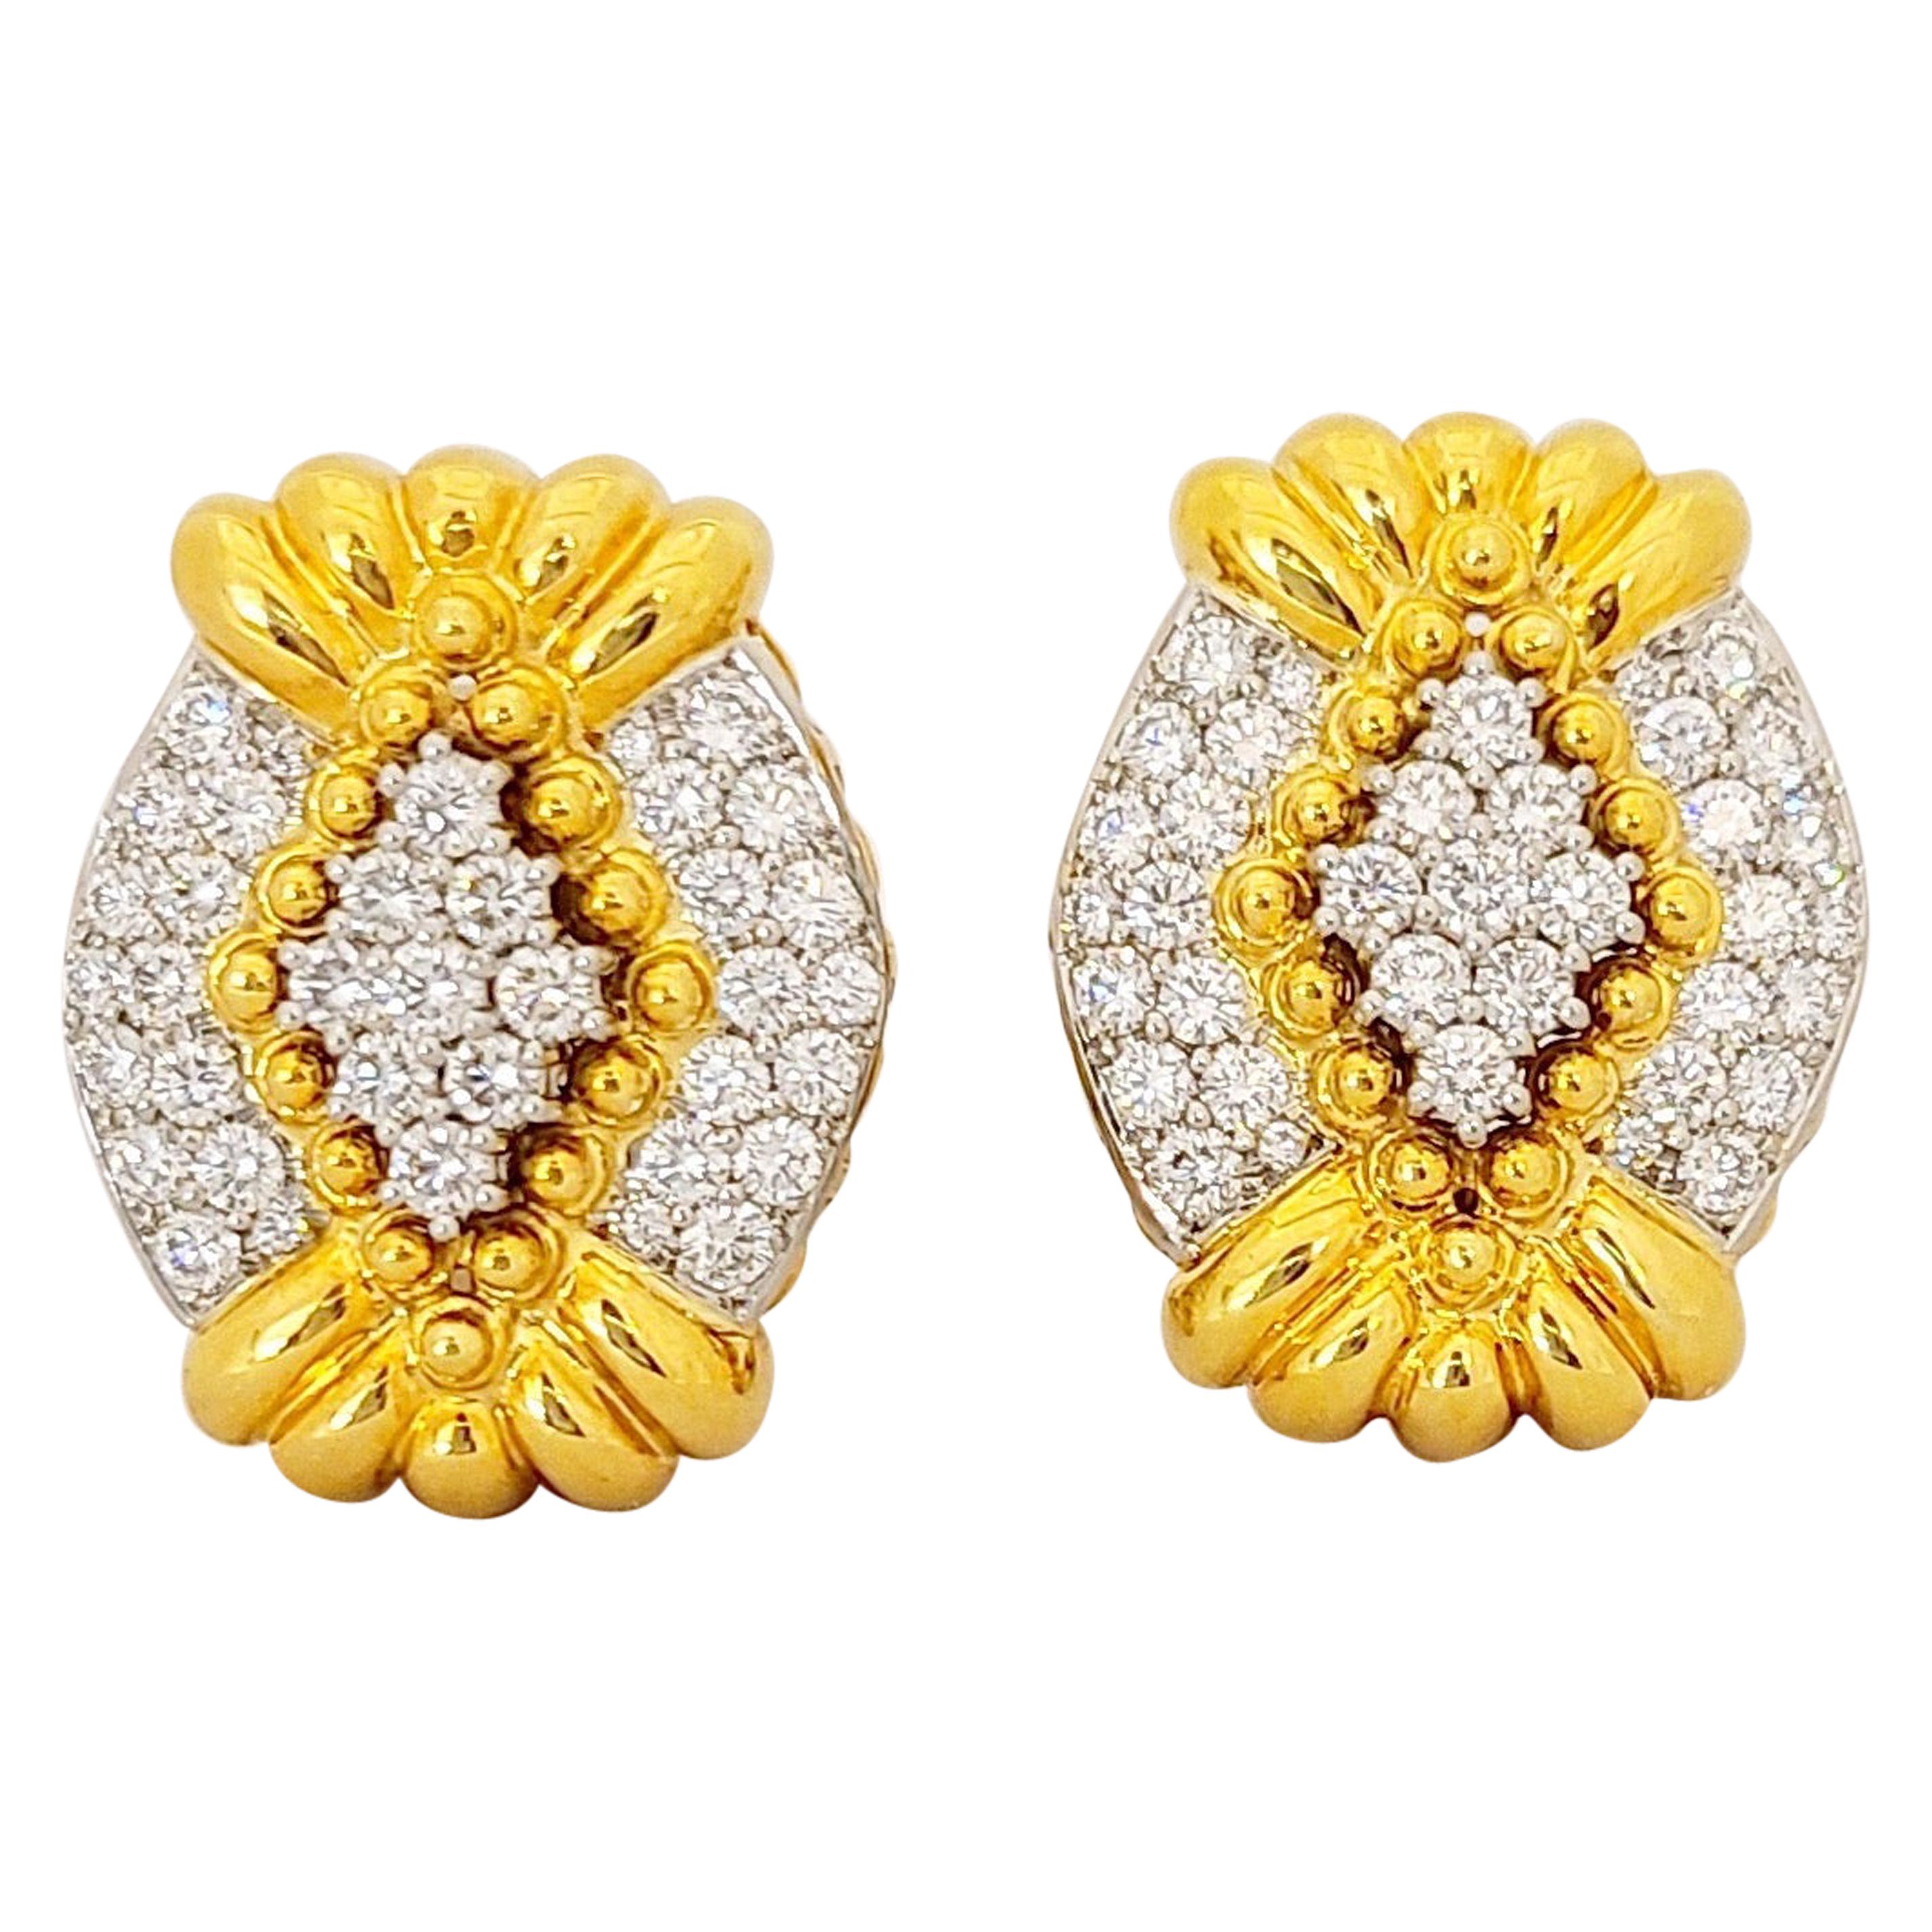 Chaavae 18 Karat Gold and Platinum, 3.50 Carat Diamonds Modified Oval Earrings For Sale